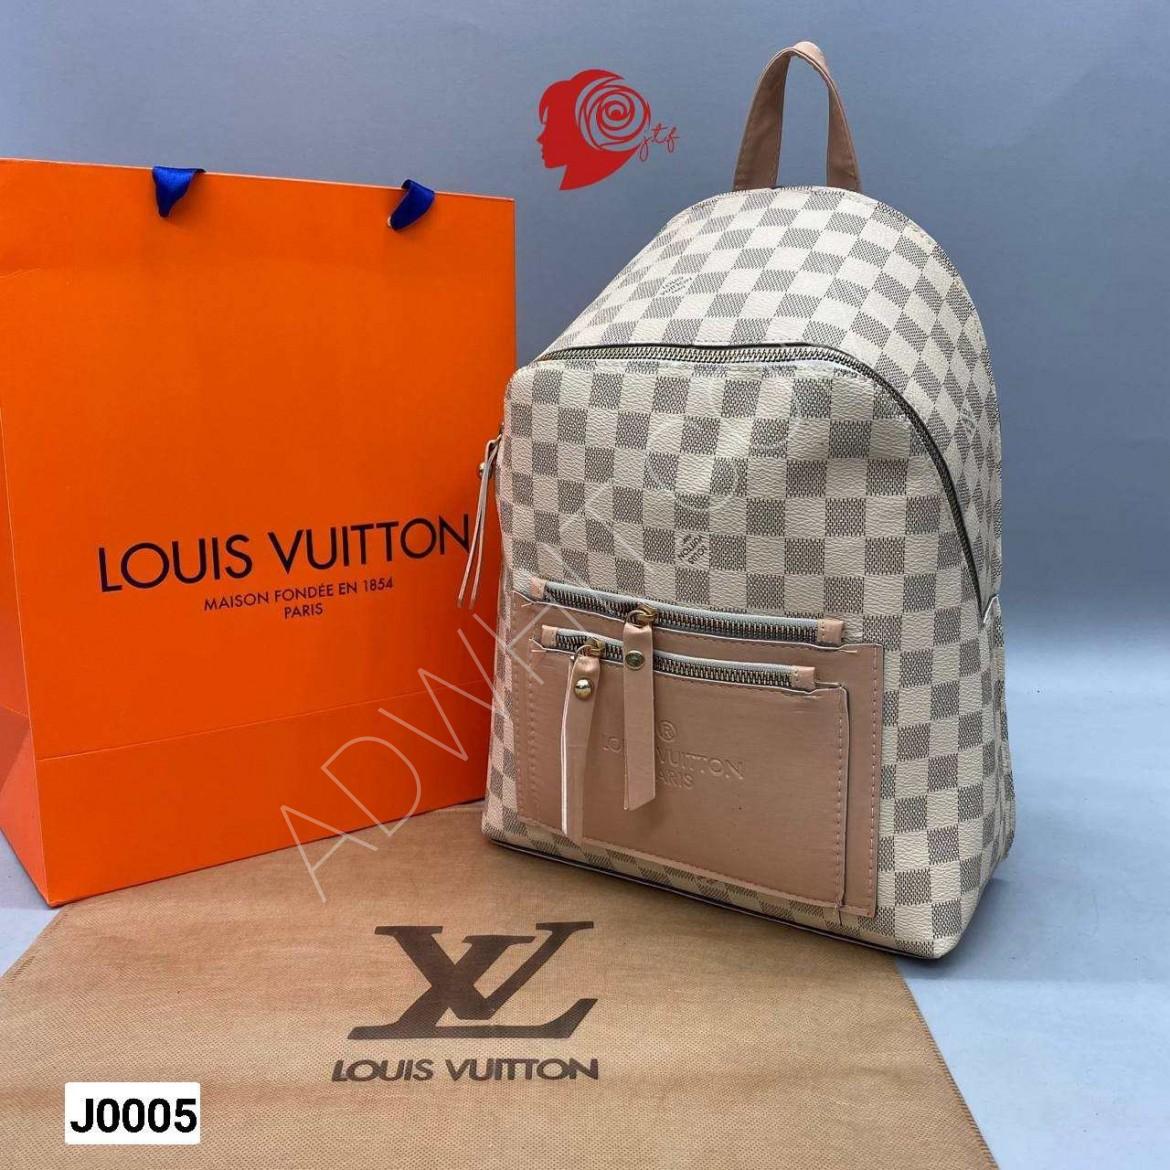 School bag and Louis Vuitton backpack - Price : 11 US Dollar